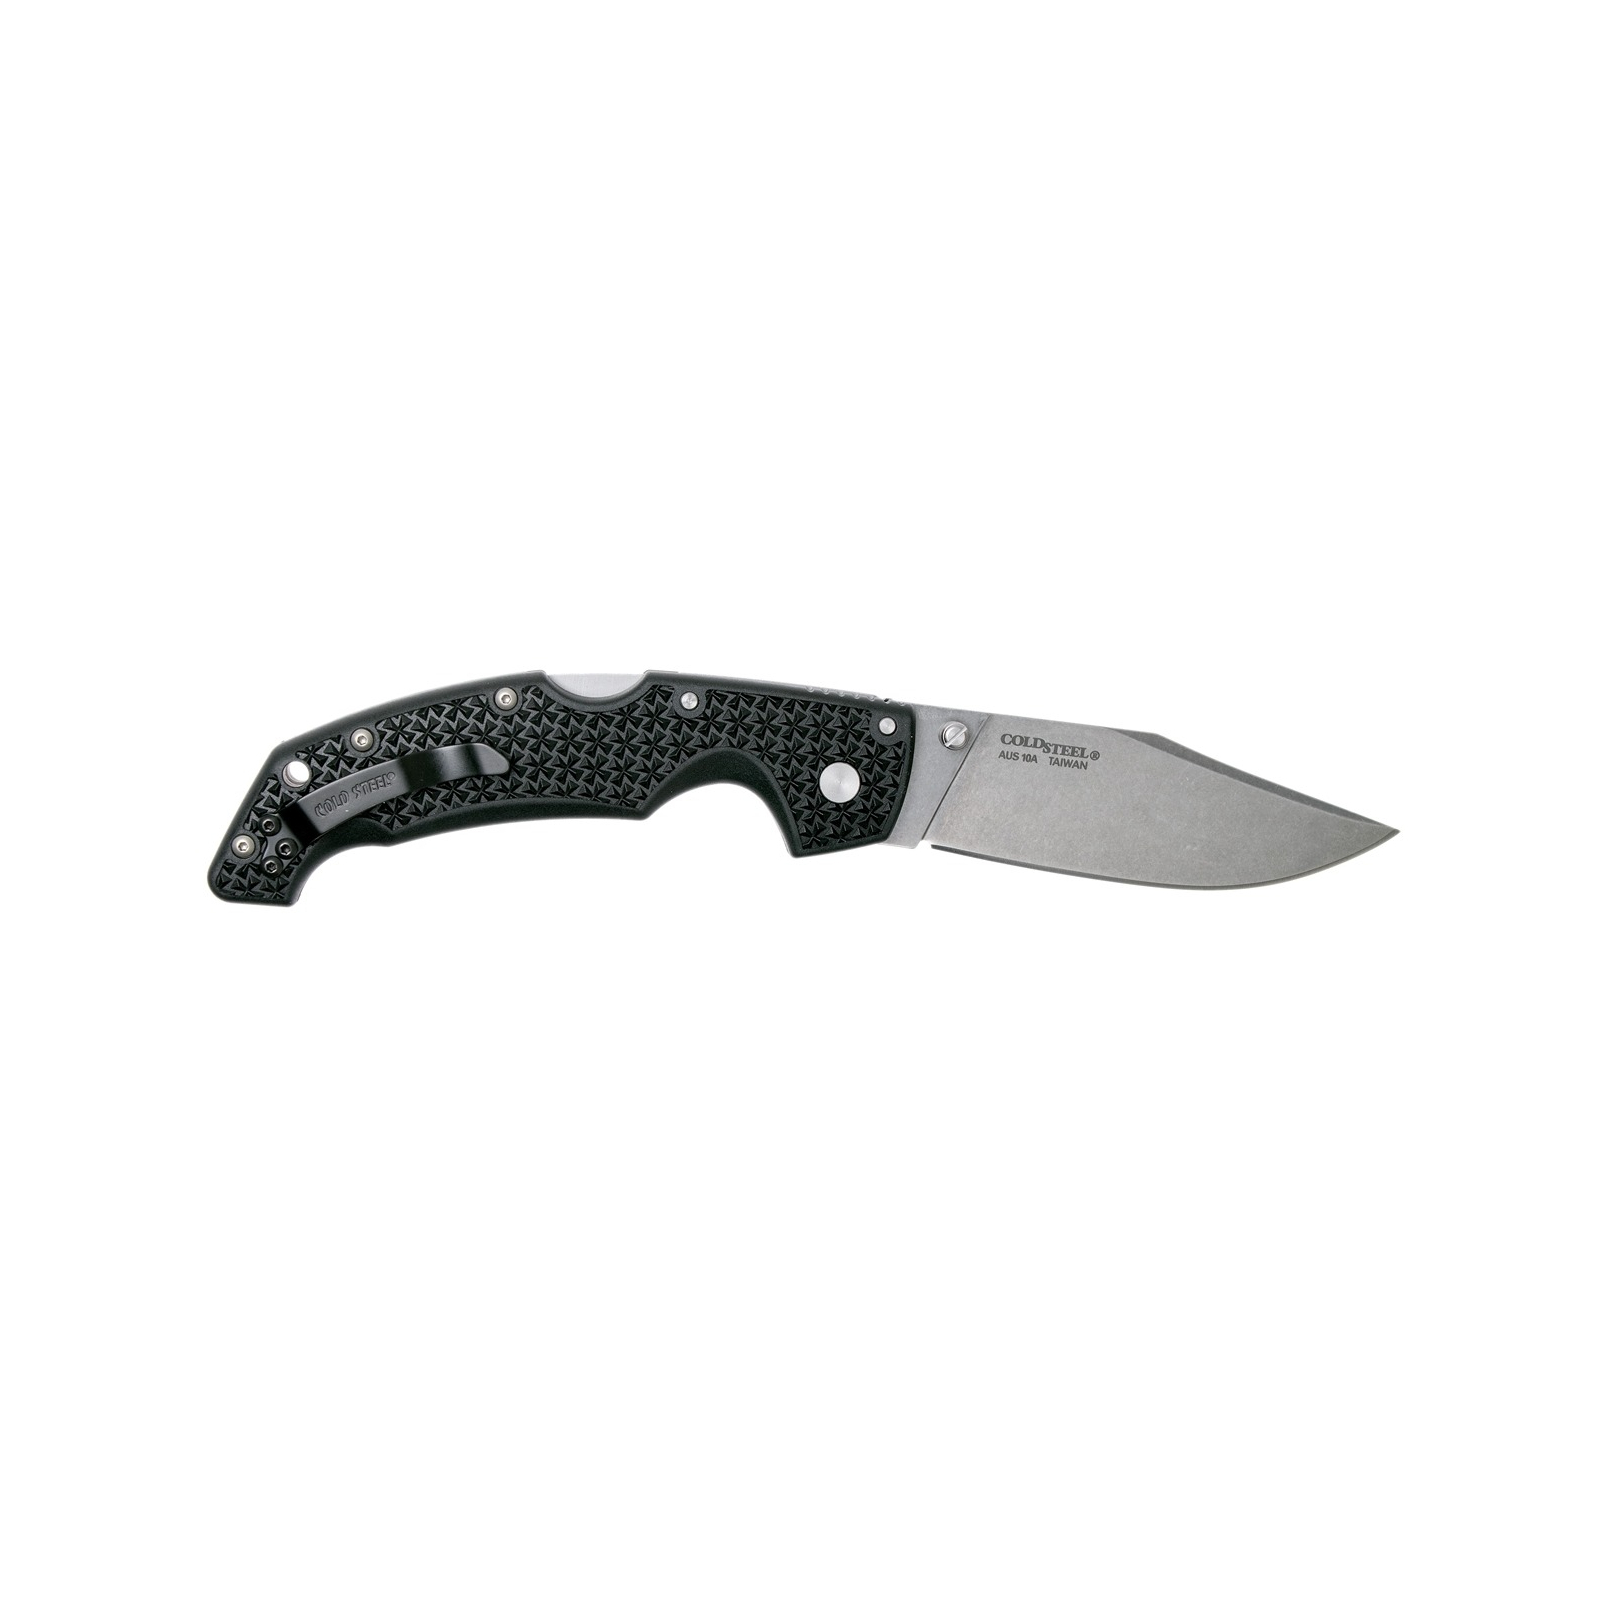 Нож Cold Steel Voyager Large CP, 10A (29AC) изображение 2